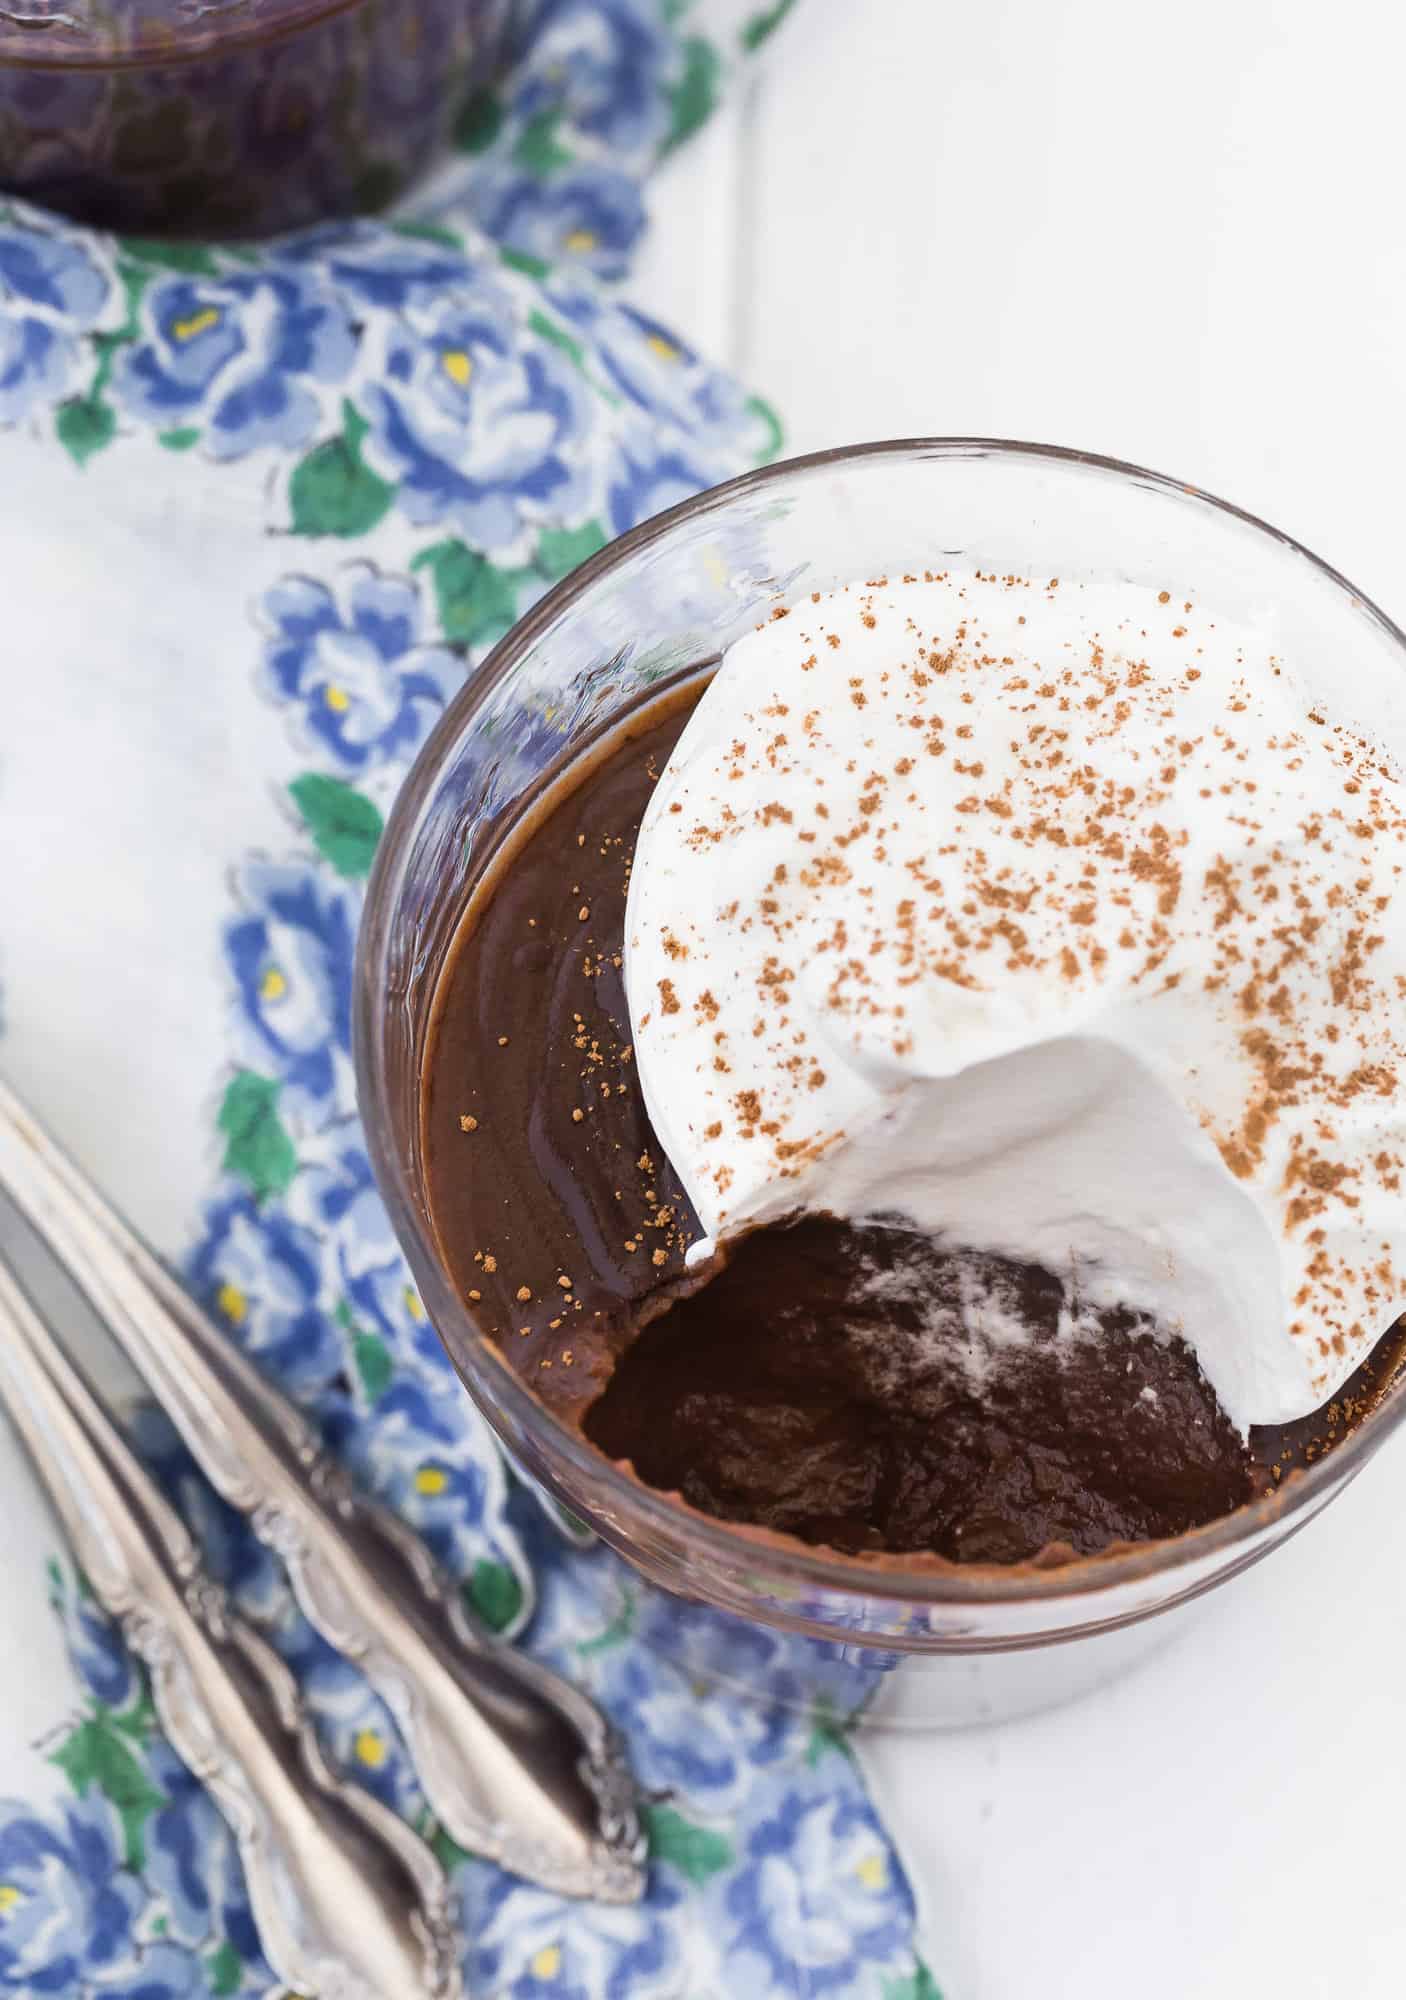 Chocolate pudding with bite out of it.